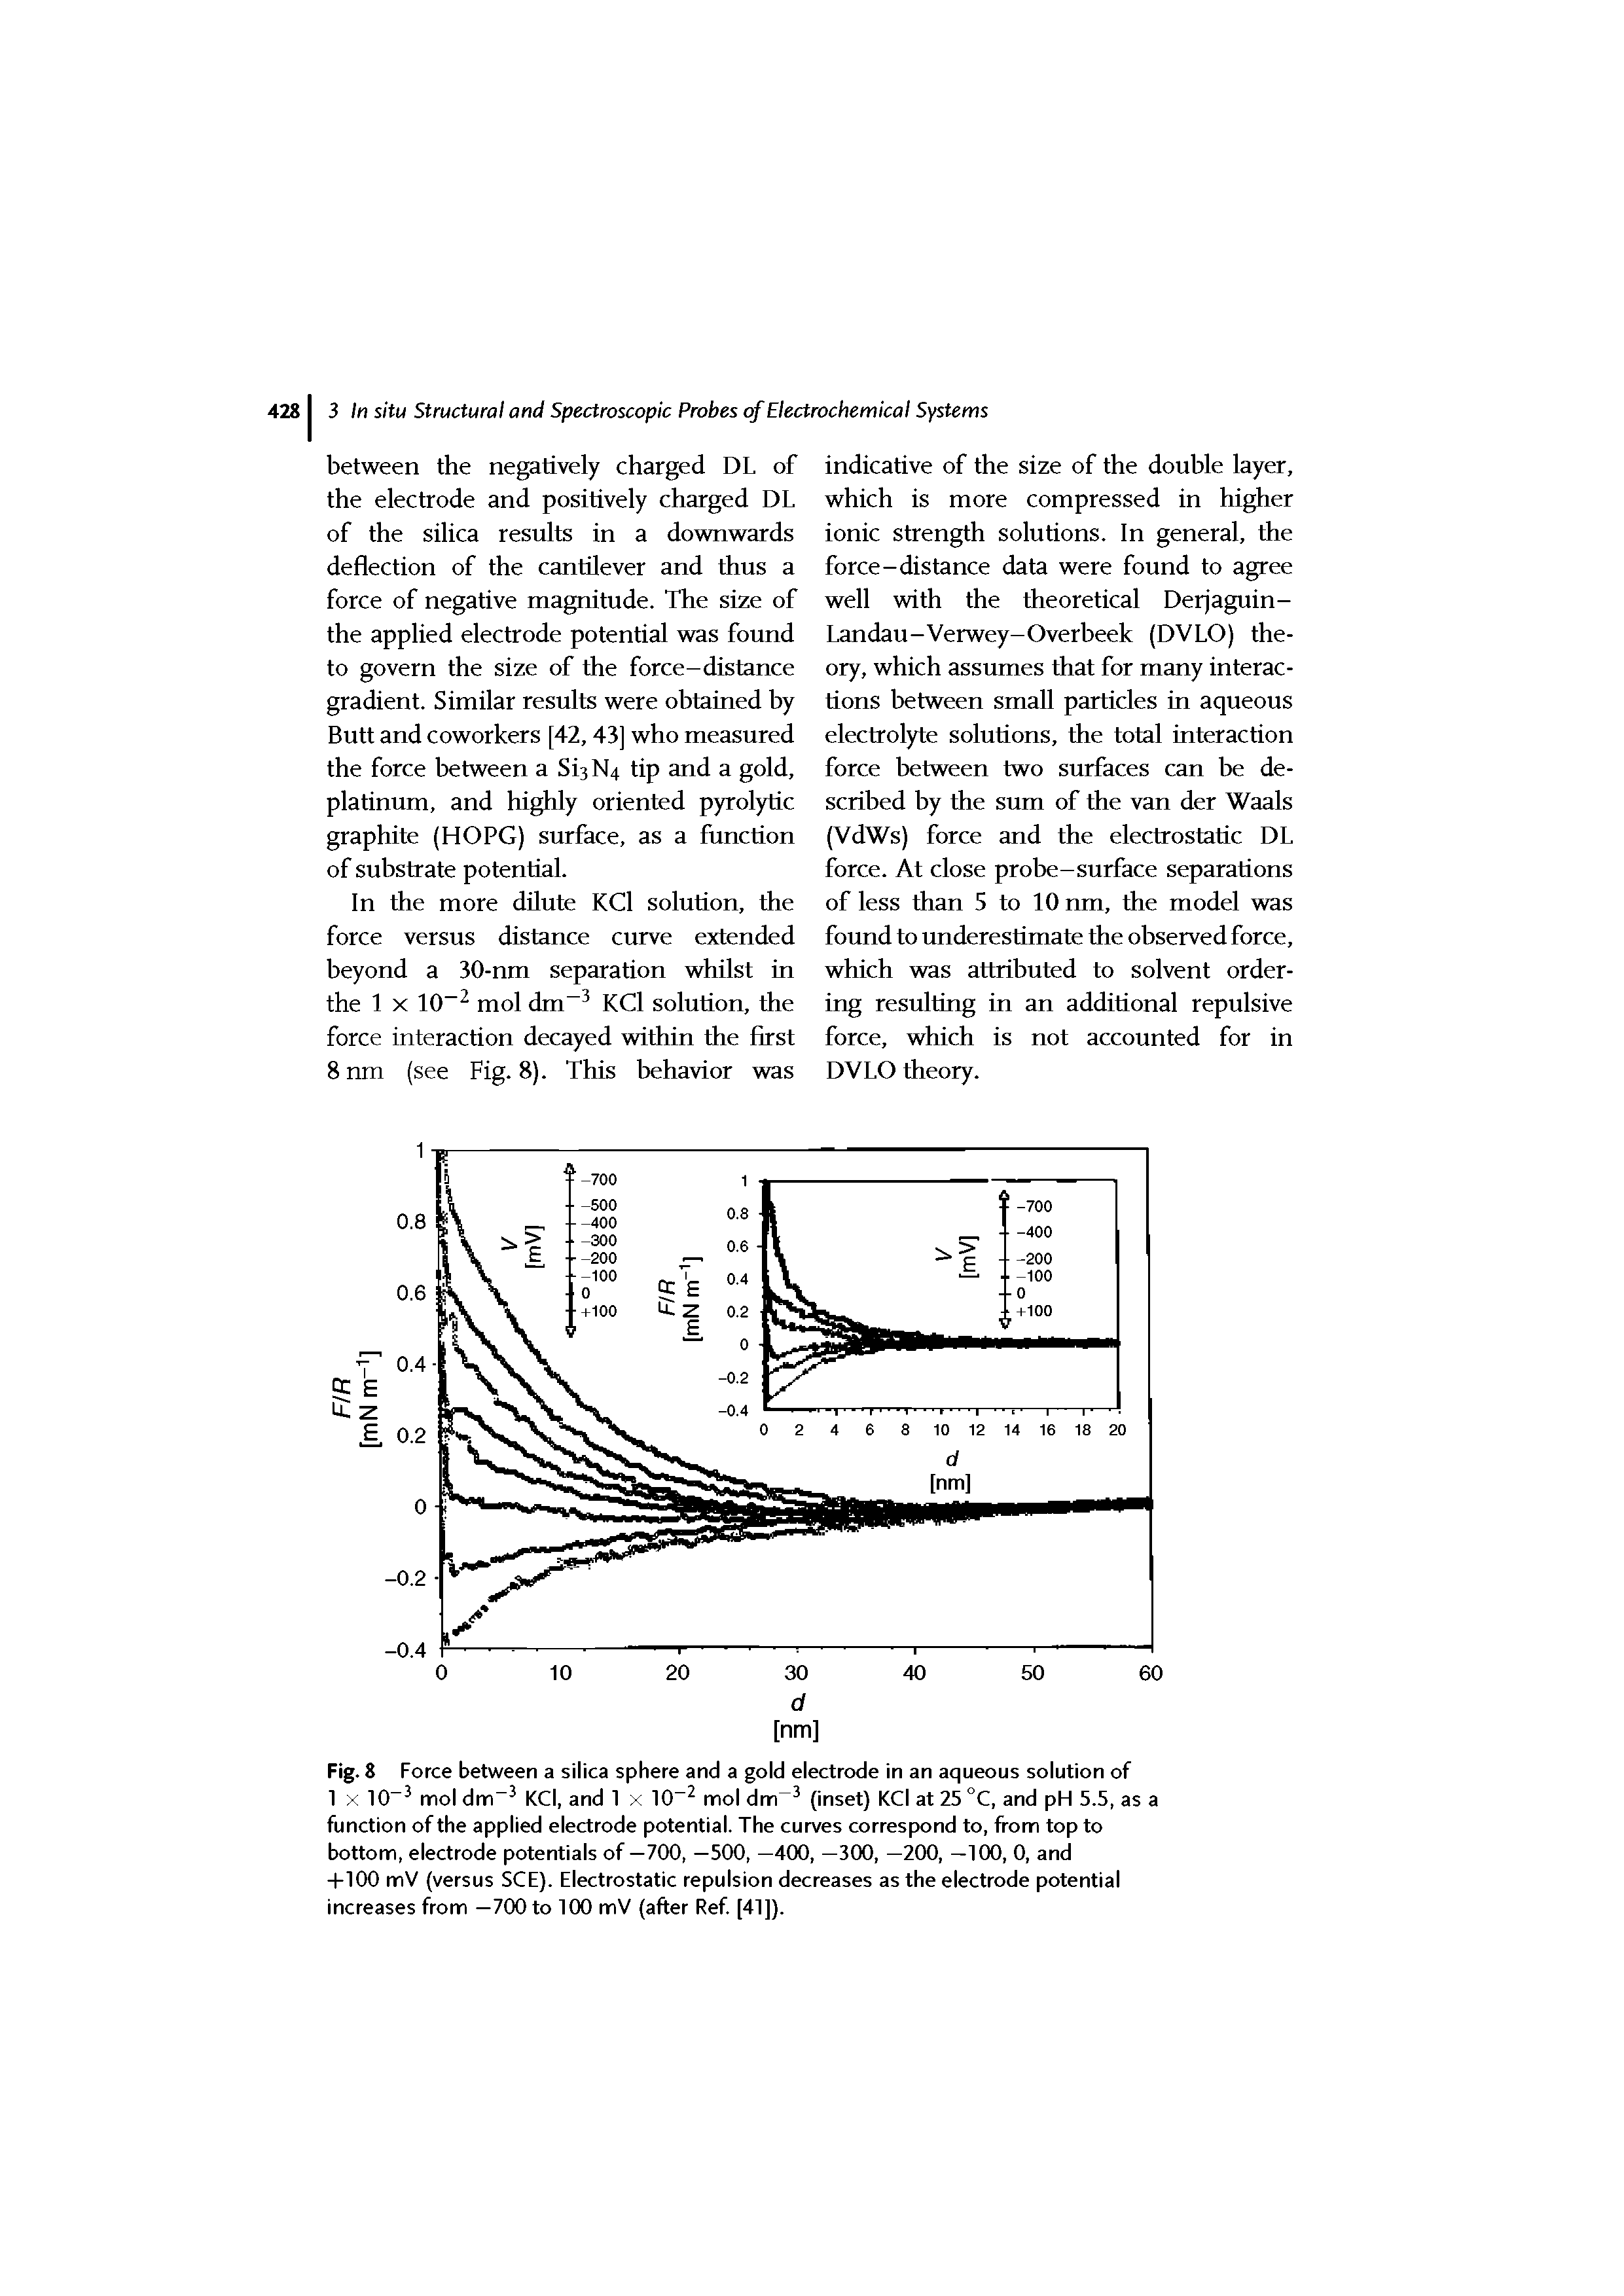 Fig. 8 Force between a silica sphere and a gold electrode in an aqueous solution of 1 X 10 mol dm KCl, and 1 x 10 mol dm (inset) KCl at 25 °C, and pH 5.5, as a function of the applied electrode potential. The curves correspond to, from top to bottom, electrode potentials of—700, —500, —400, —300, —200, —100, 0, and -1-100 mV (versus SCE). Electrostatic repulsion decreases as the electrode potential increases from —700 to 100 mV (after Ref [41]).